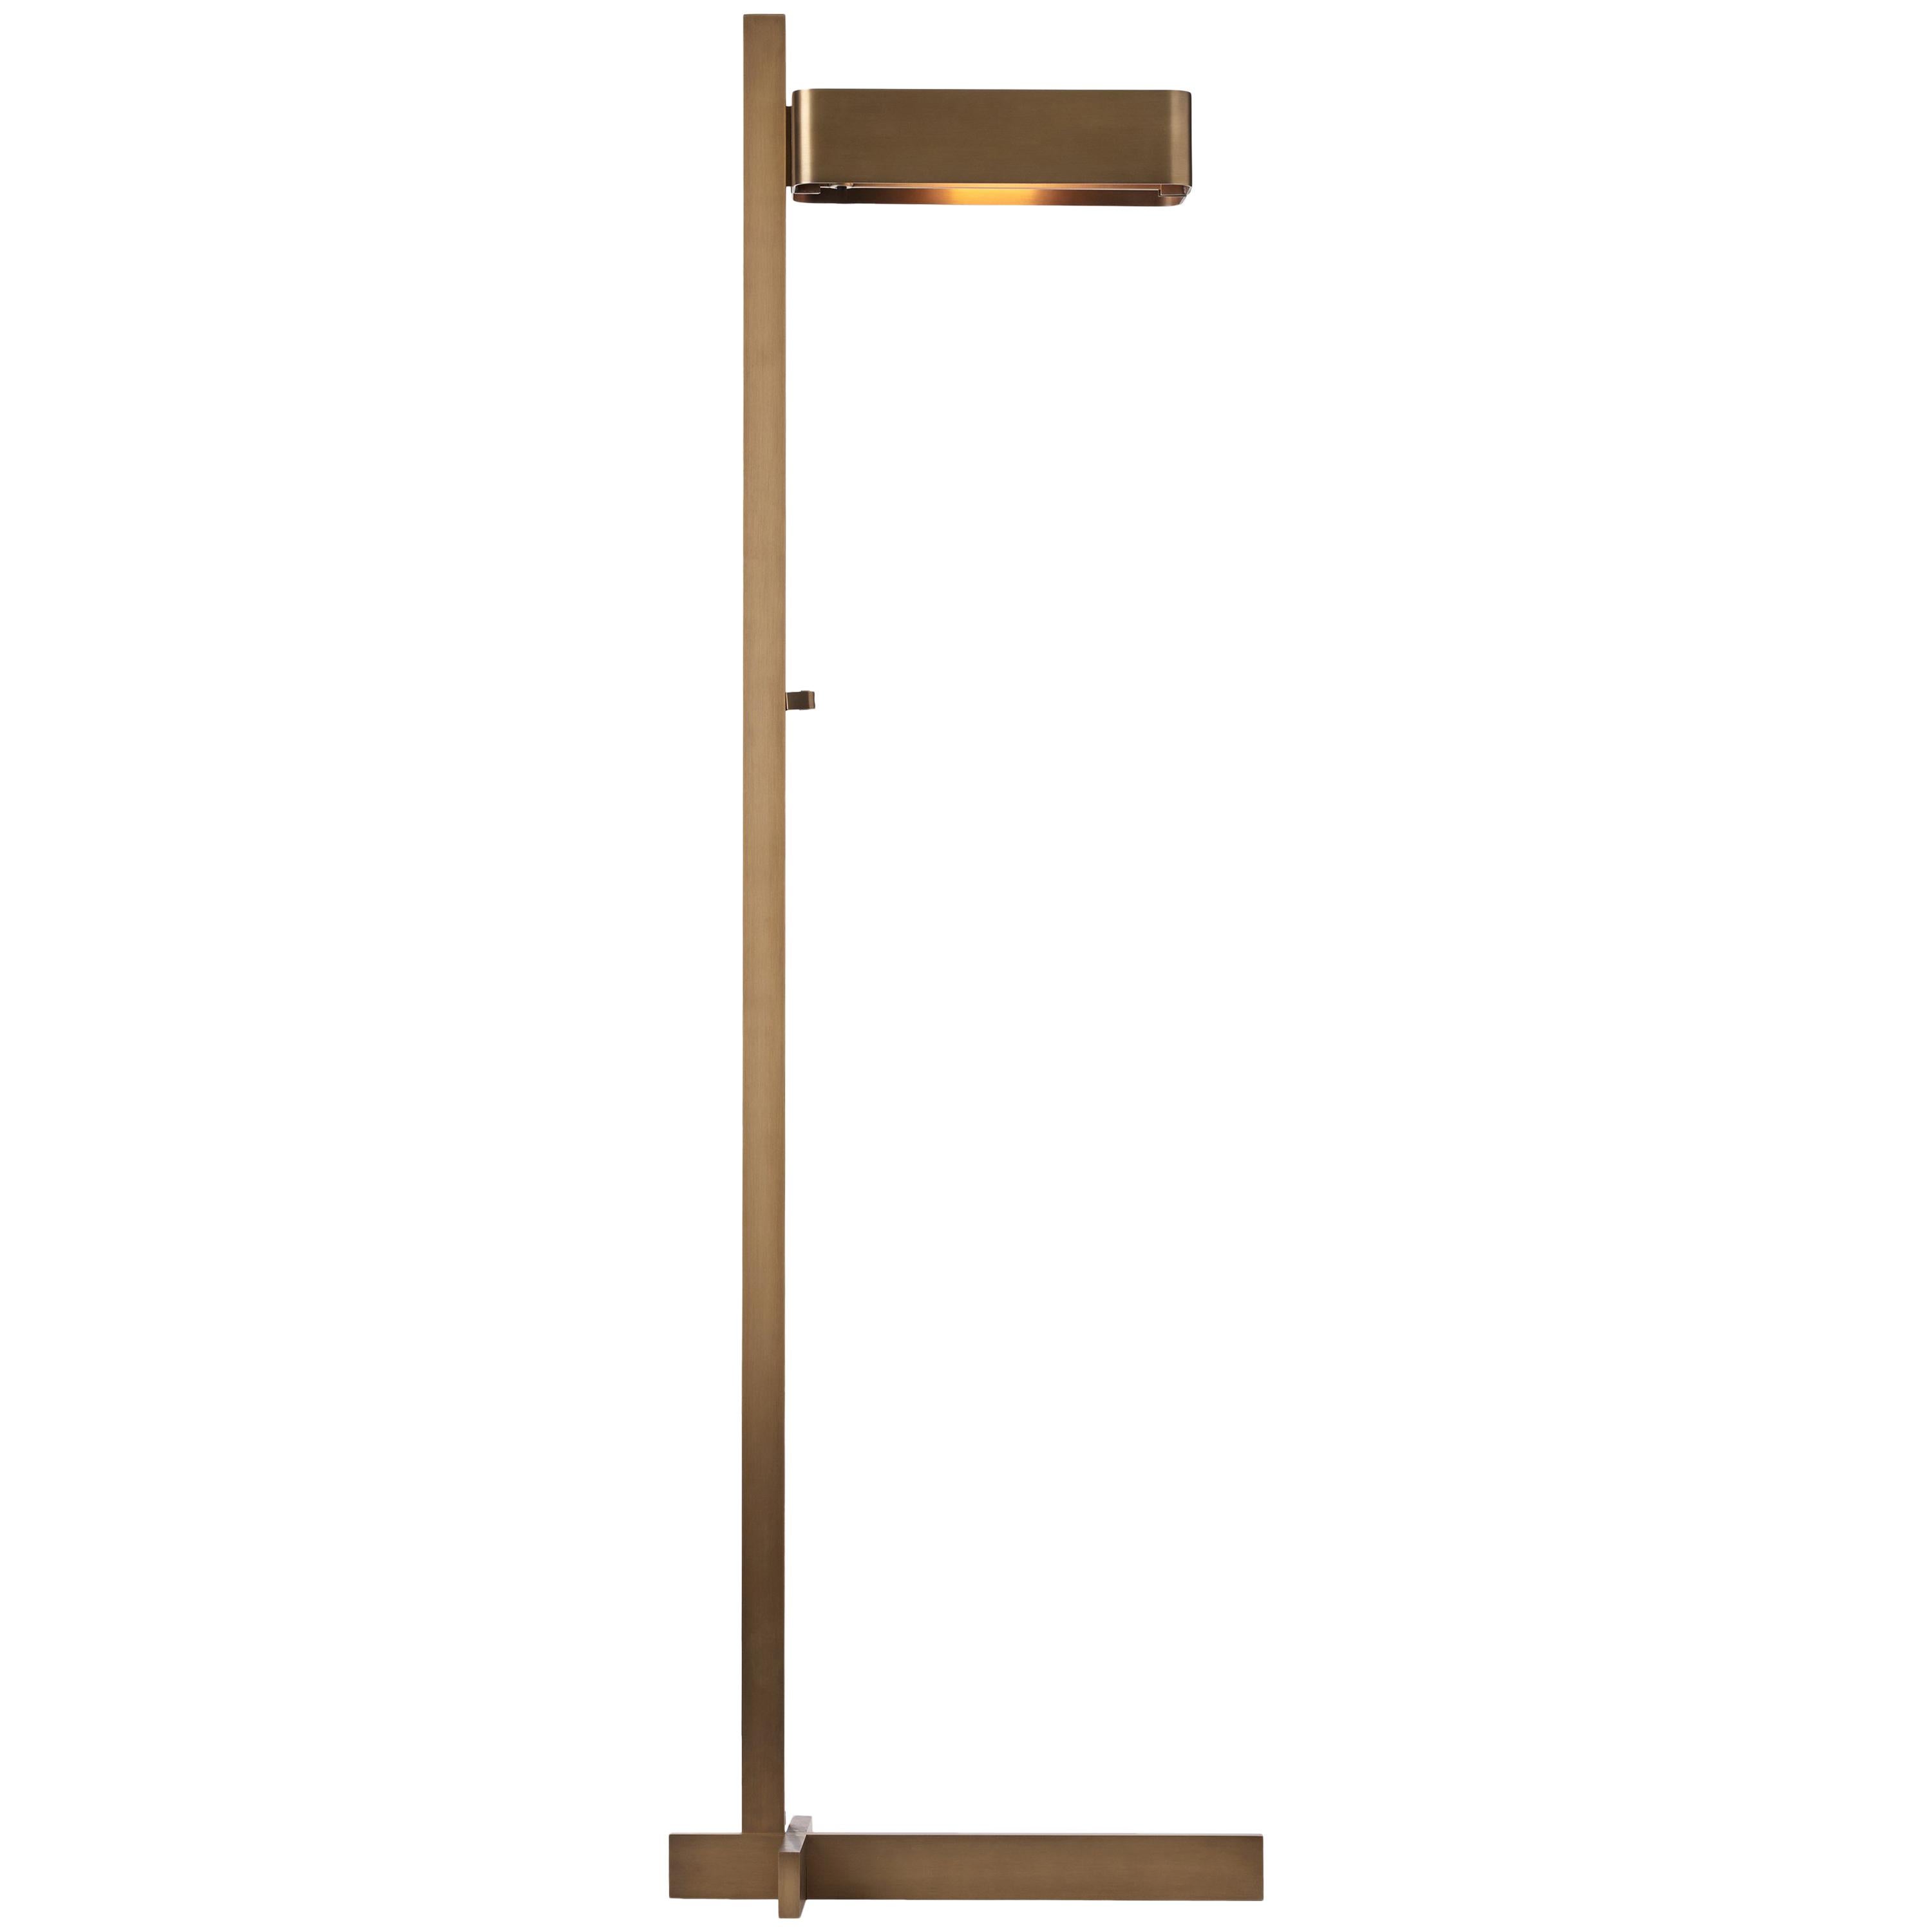 Tekna Butterfield Floor Lamp with Distressed Brass Finish